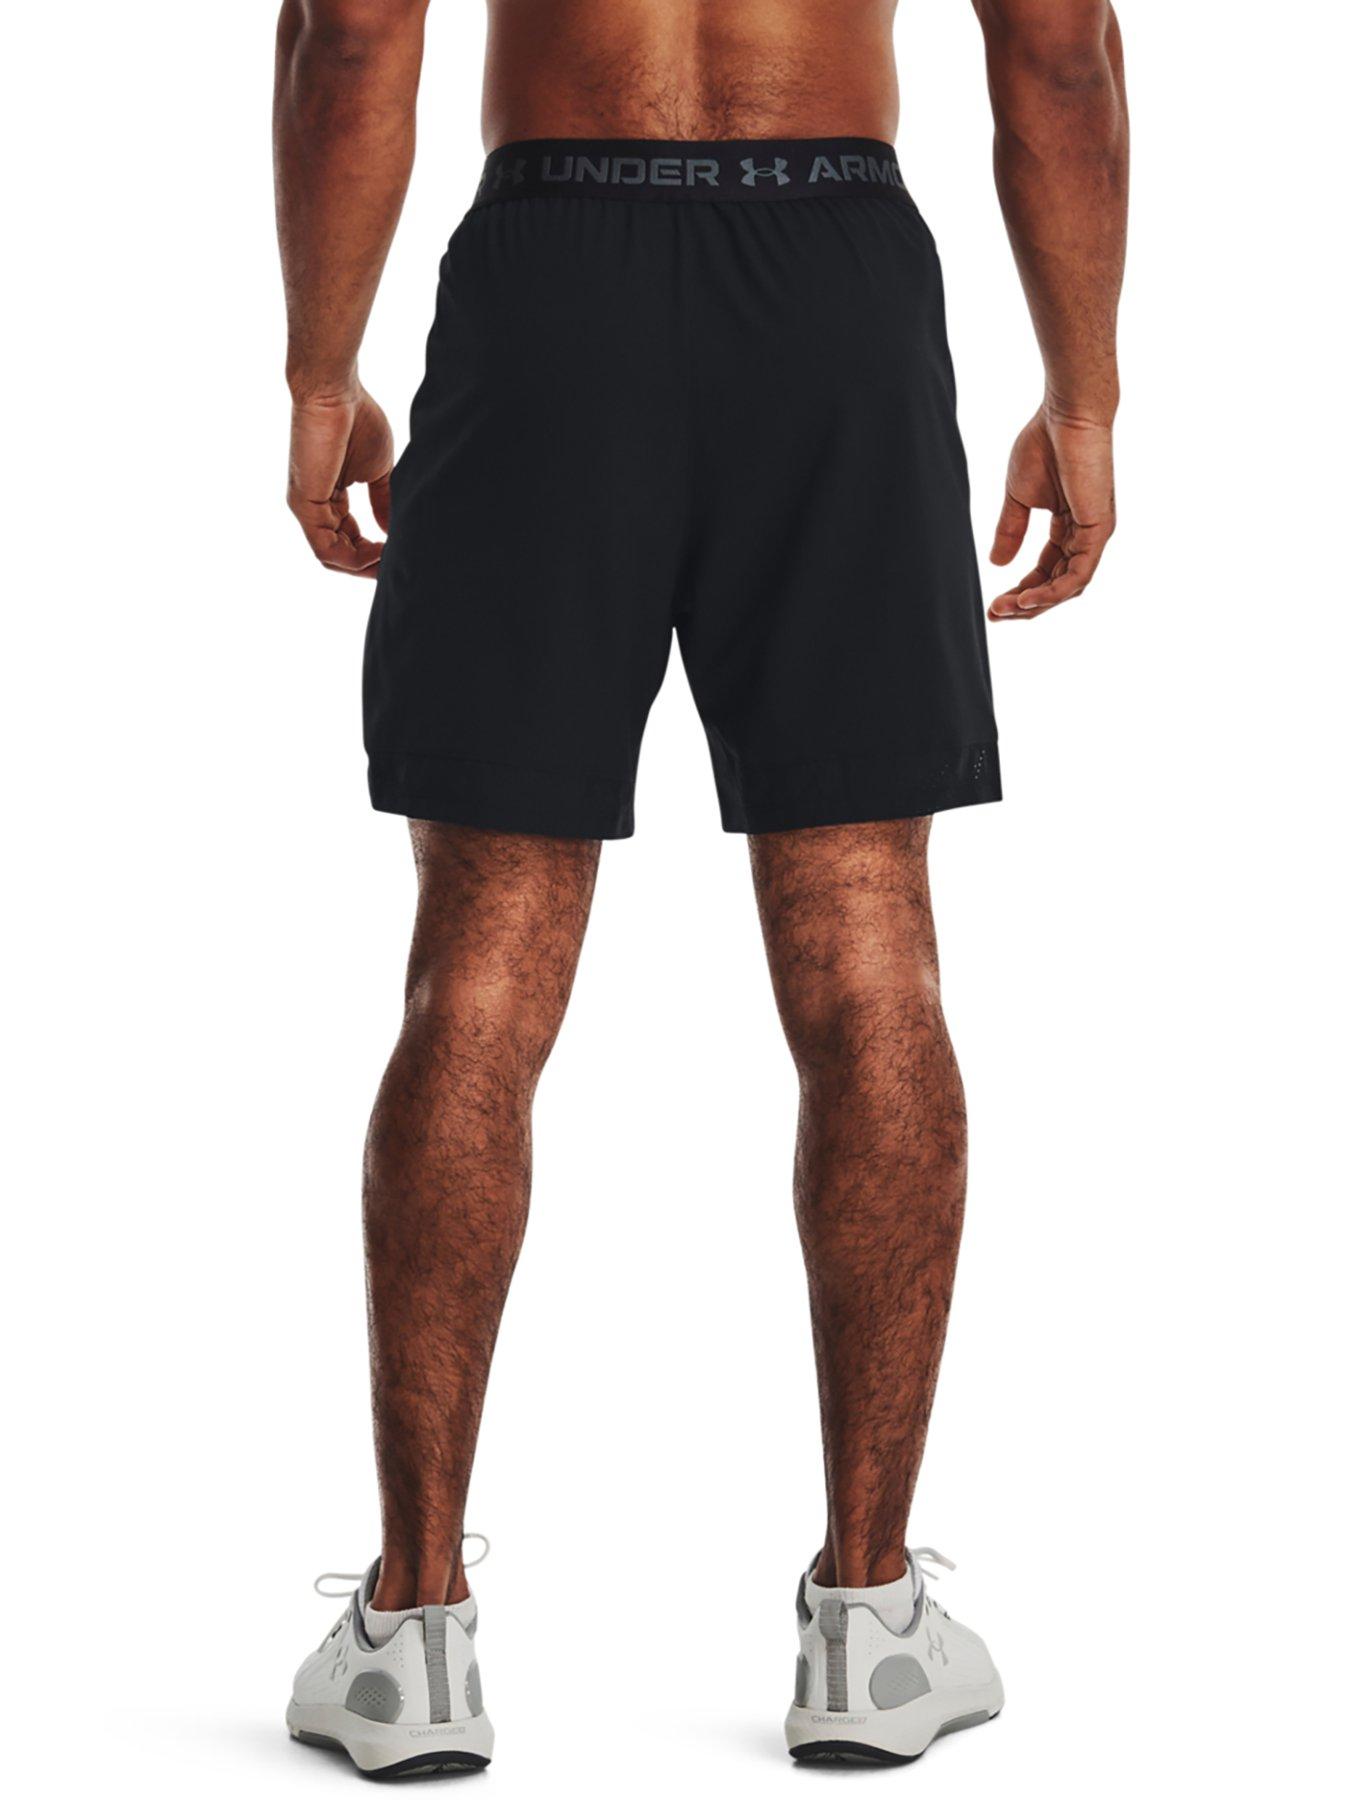 Under Armour Men's Golf Vented Shorts - Gray, 34